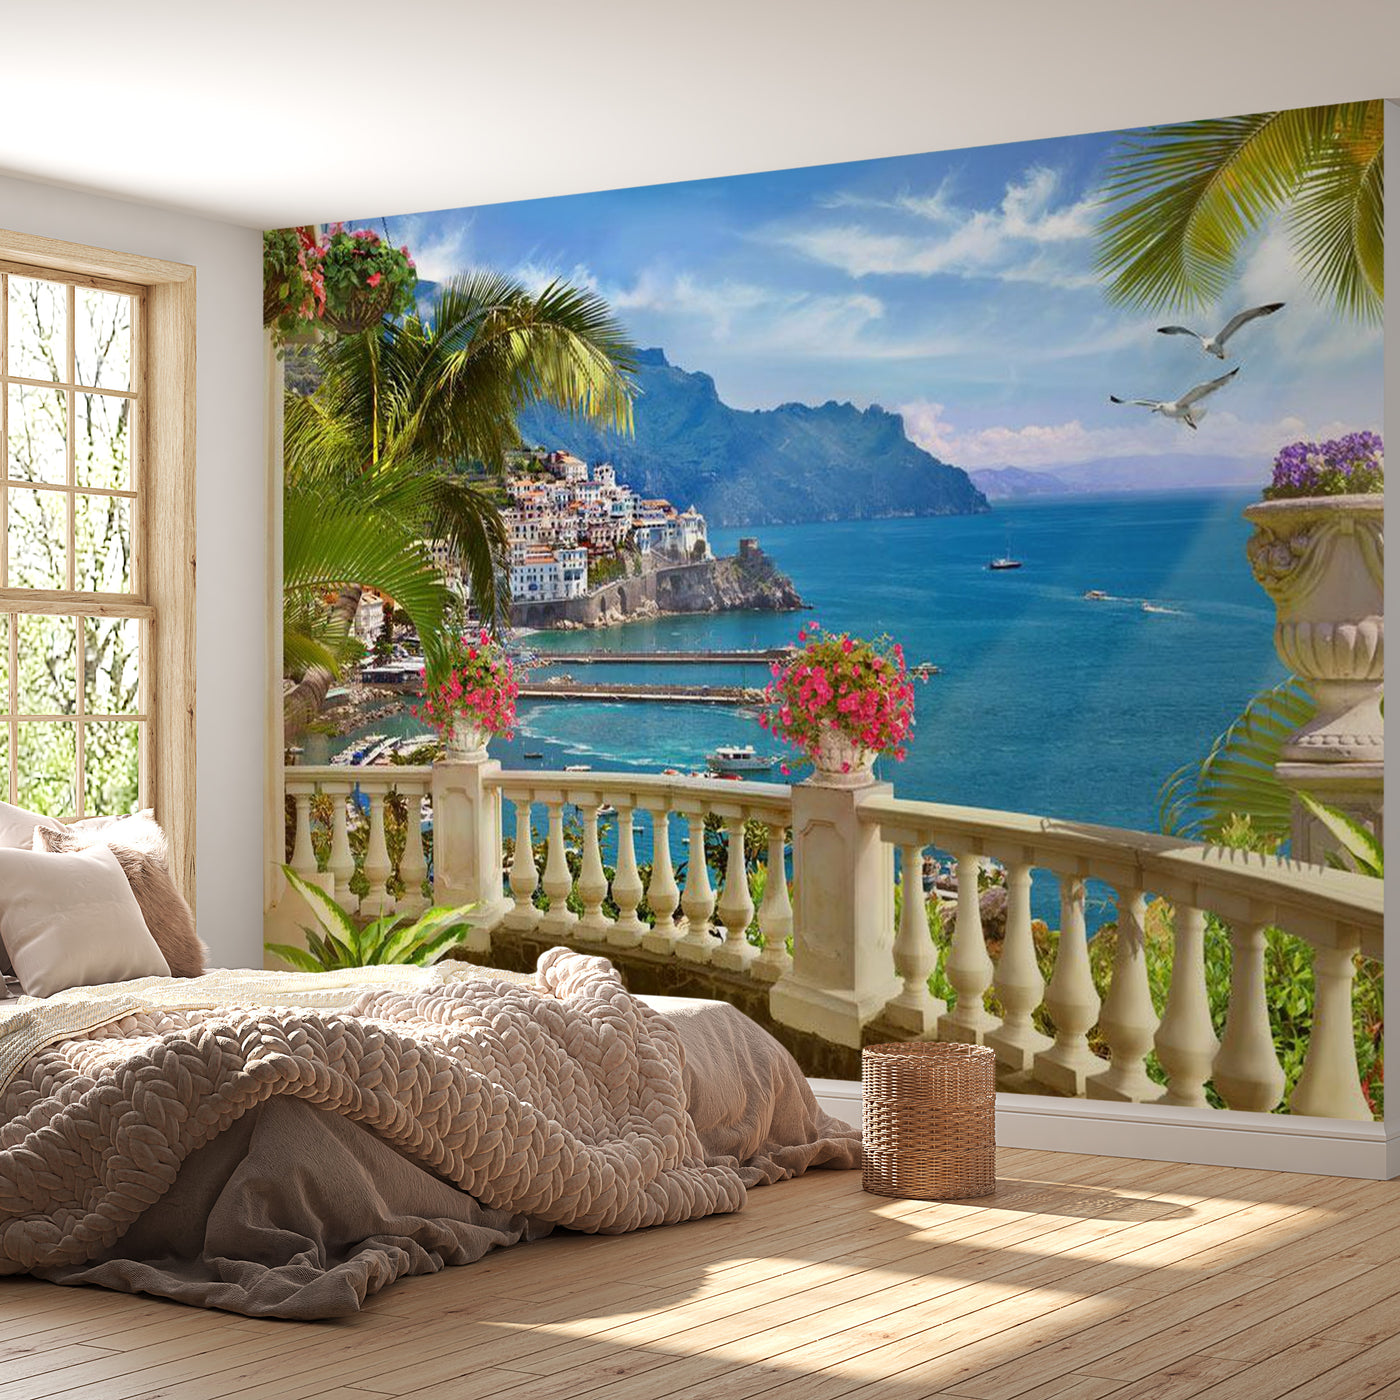 Peel & Stick Tropical Wall Mural - Mediterranean Paradise - Removable Wall Decals